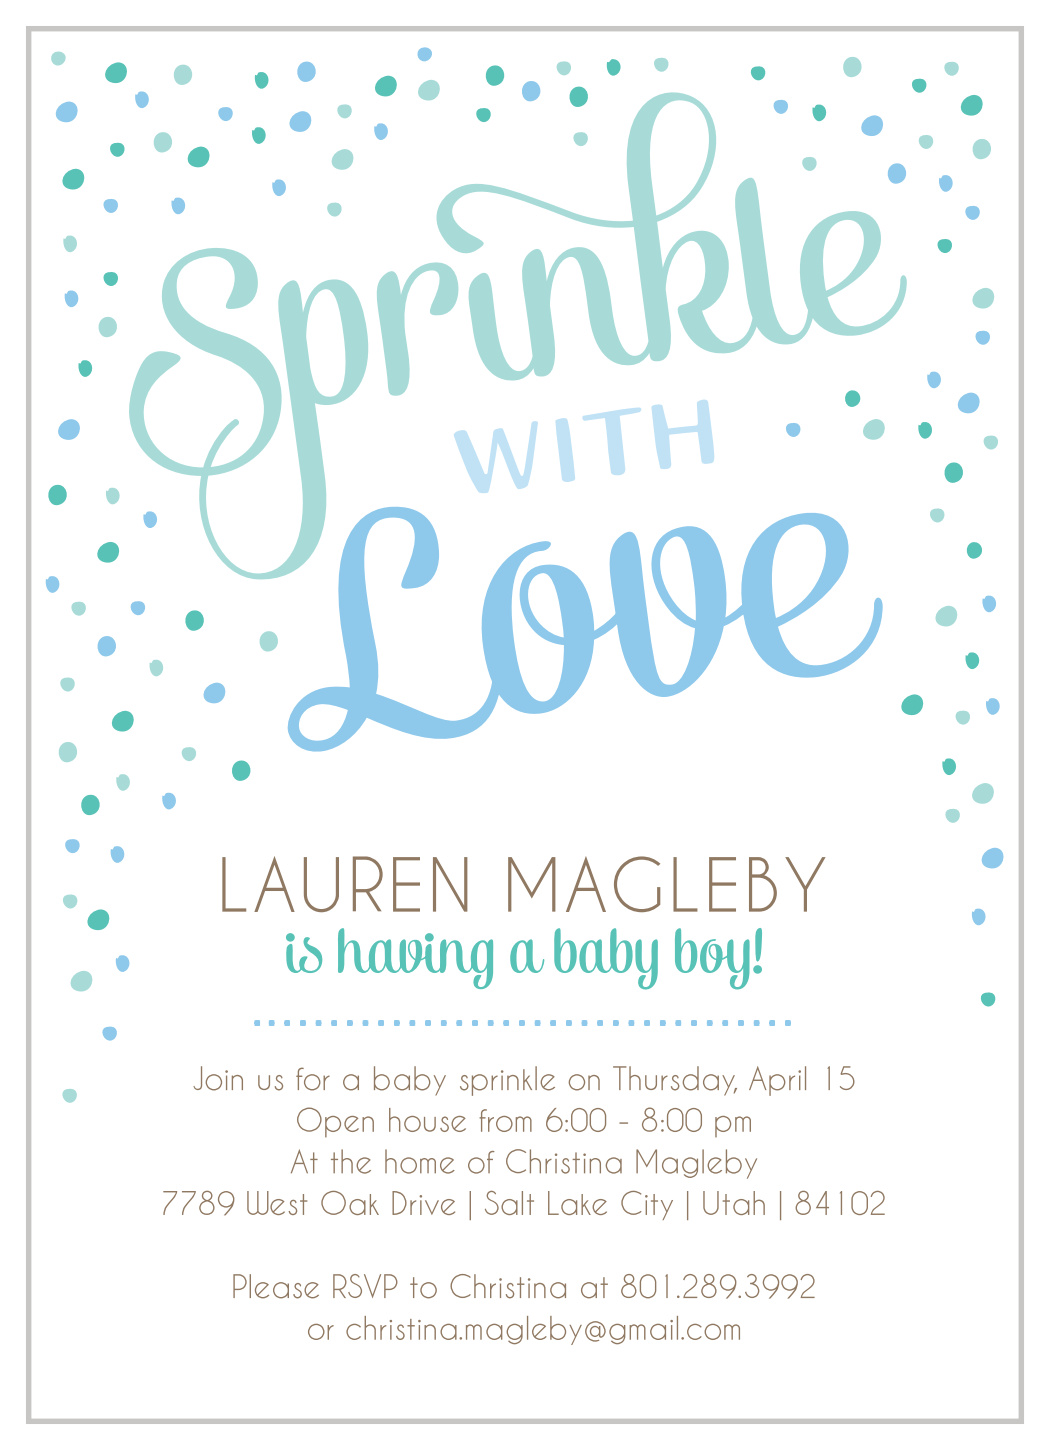 Sprinkle With Love Baby Shower Invitations